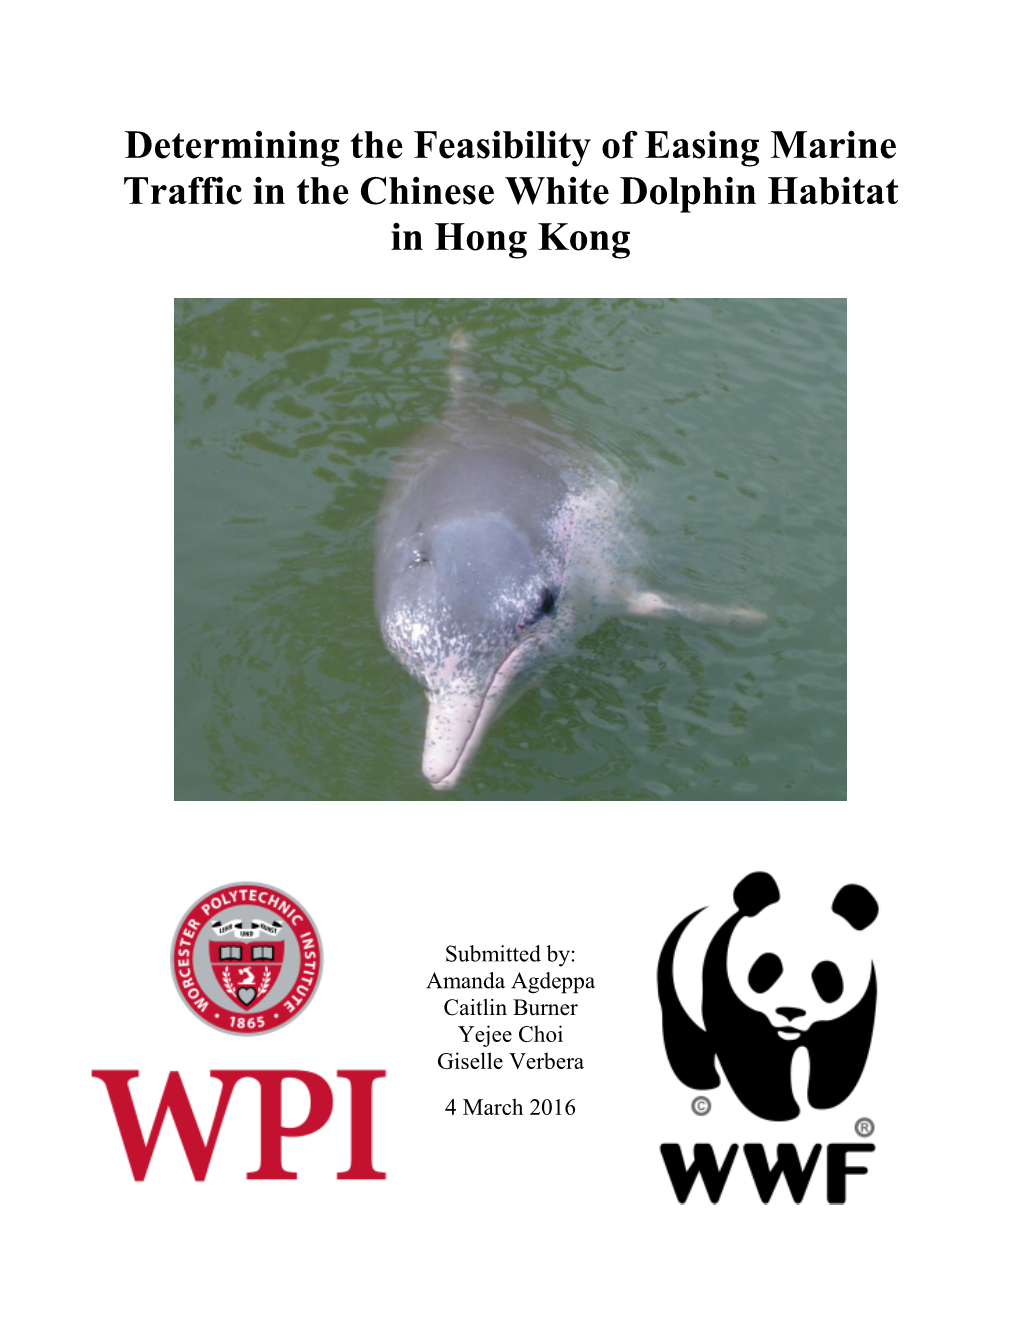 Determining the Feasibility of Easing Marine Traffic in the Chinese White Dolphin Habitat in Hong Kong